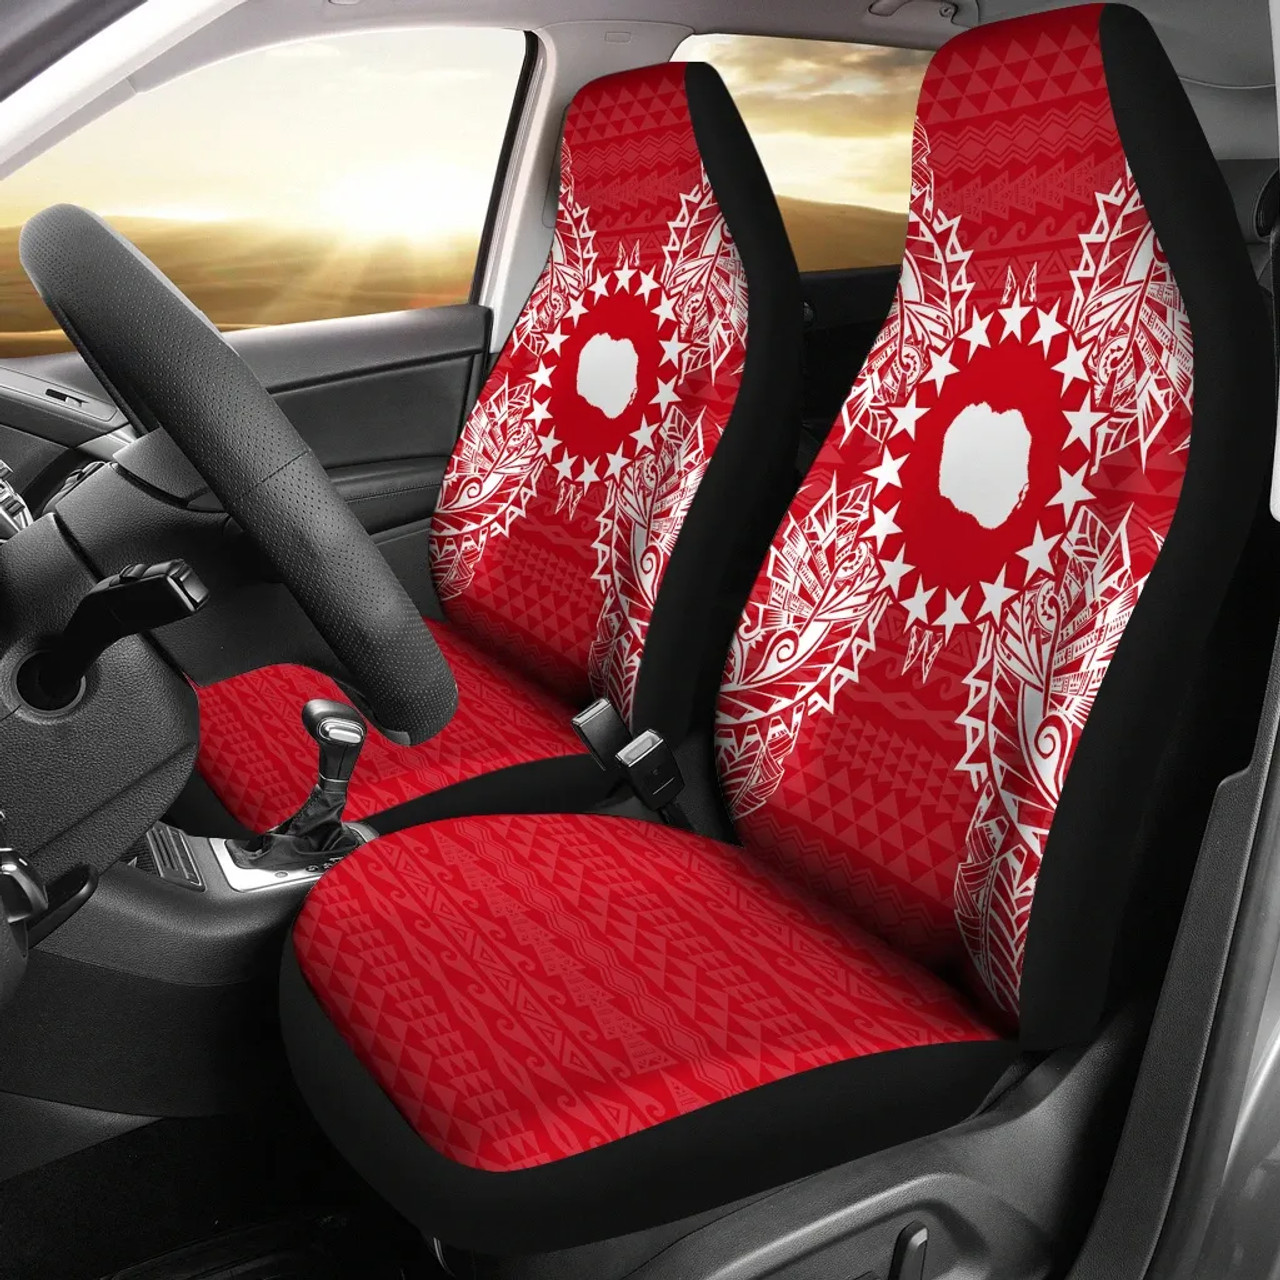 Cook Islands Car Seat Cover - Cook Islands Flag Map Red White